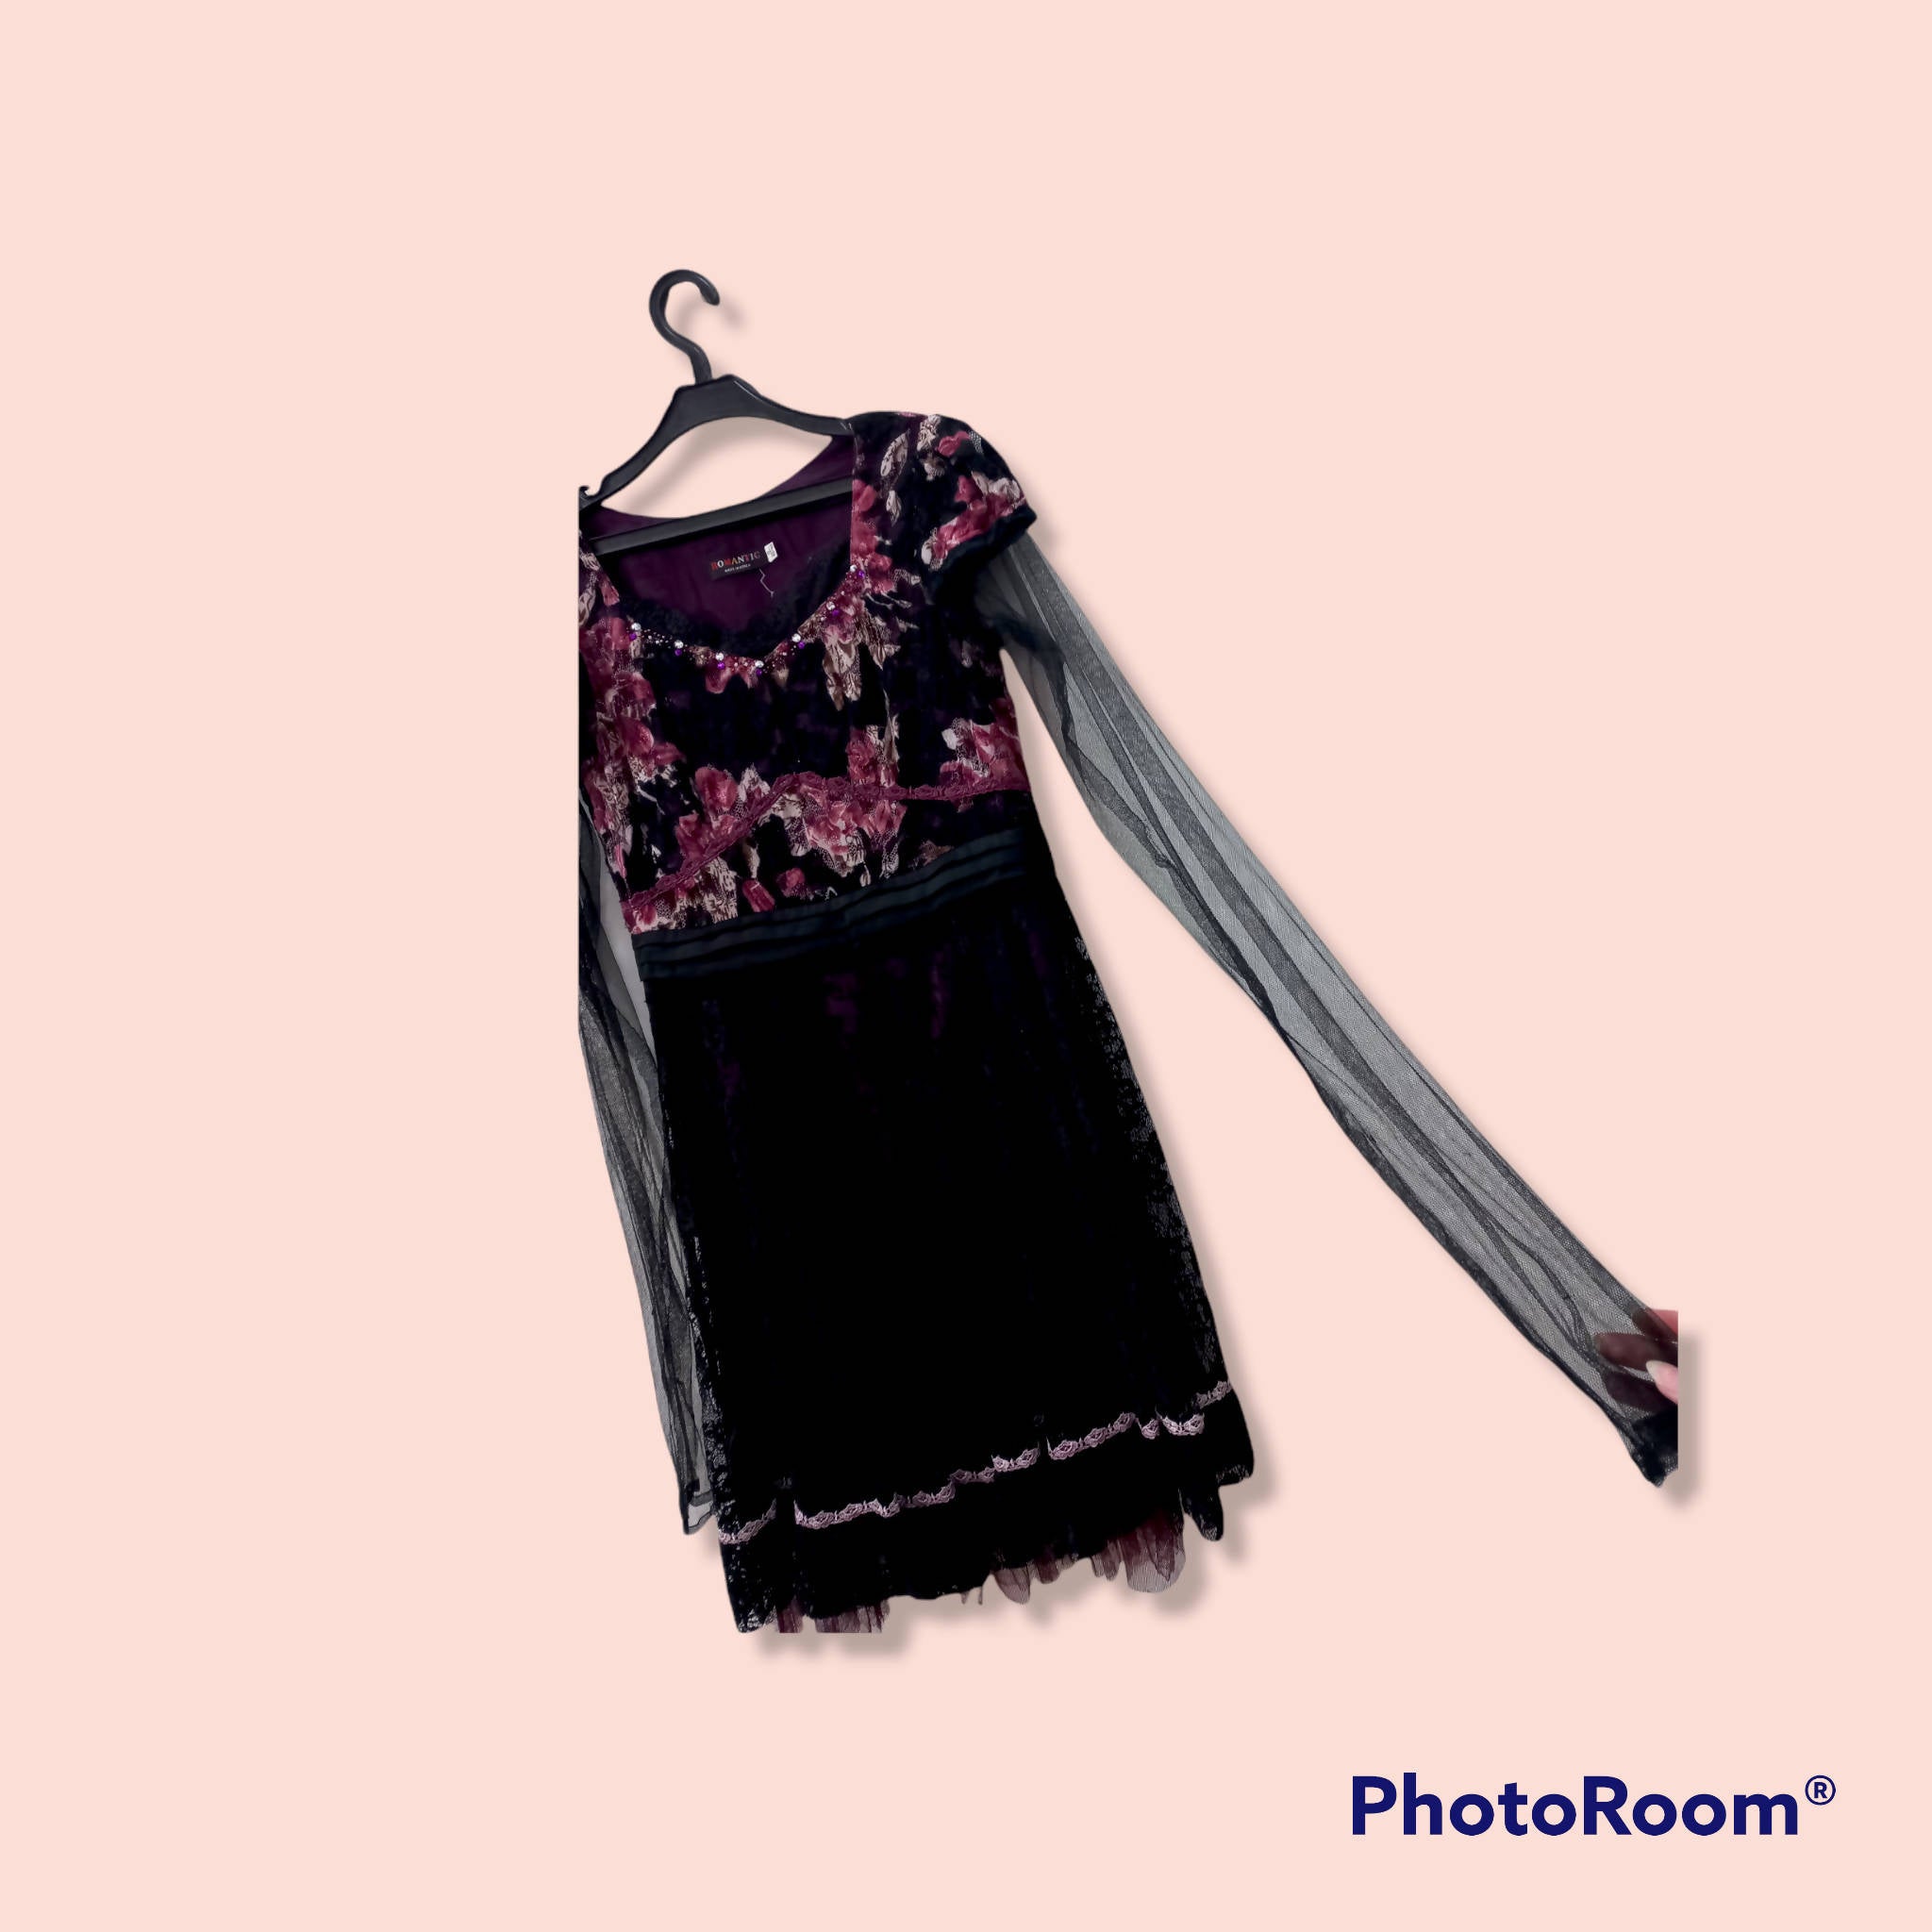 Black Net Frock For Girls | women Frock and Maxi | Preloved